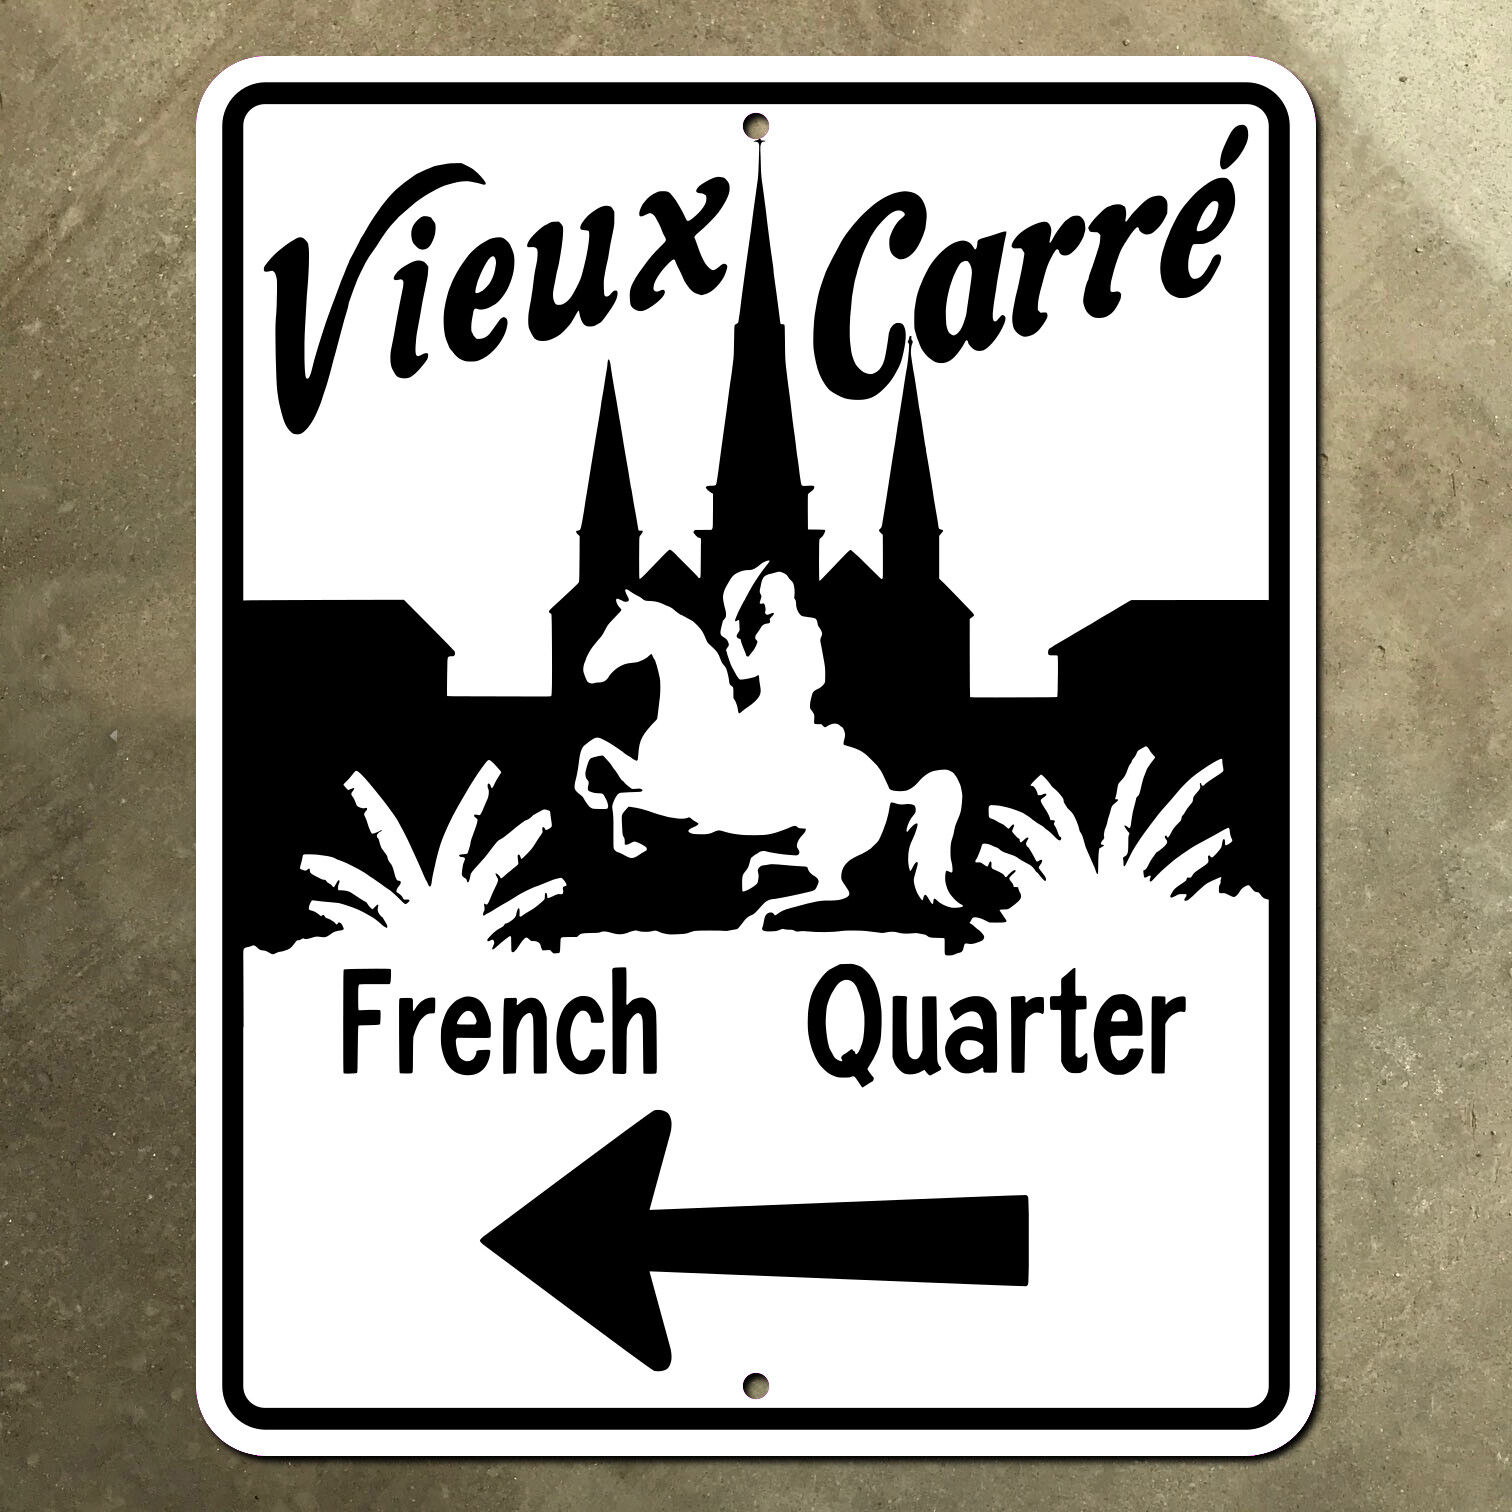 New Orleans Louisiana French Quarter highway marker road sign 16x20 Vieux Carre